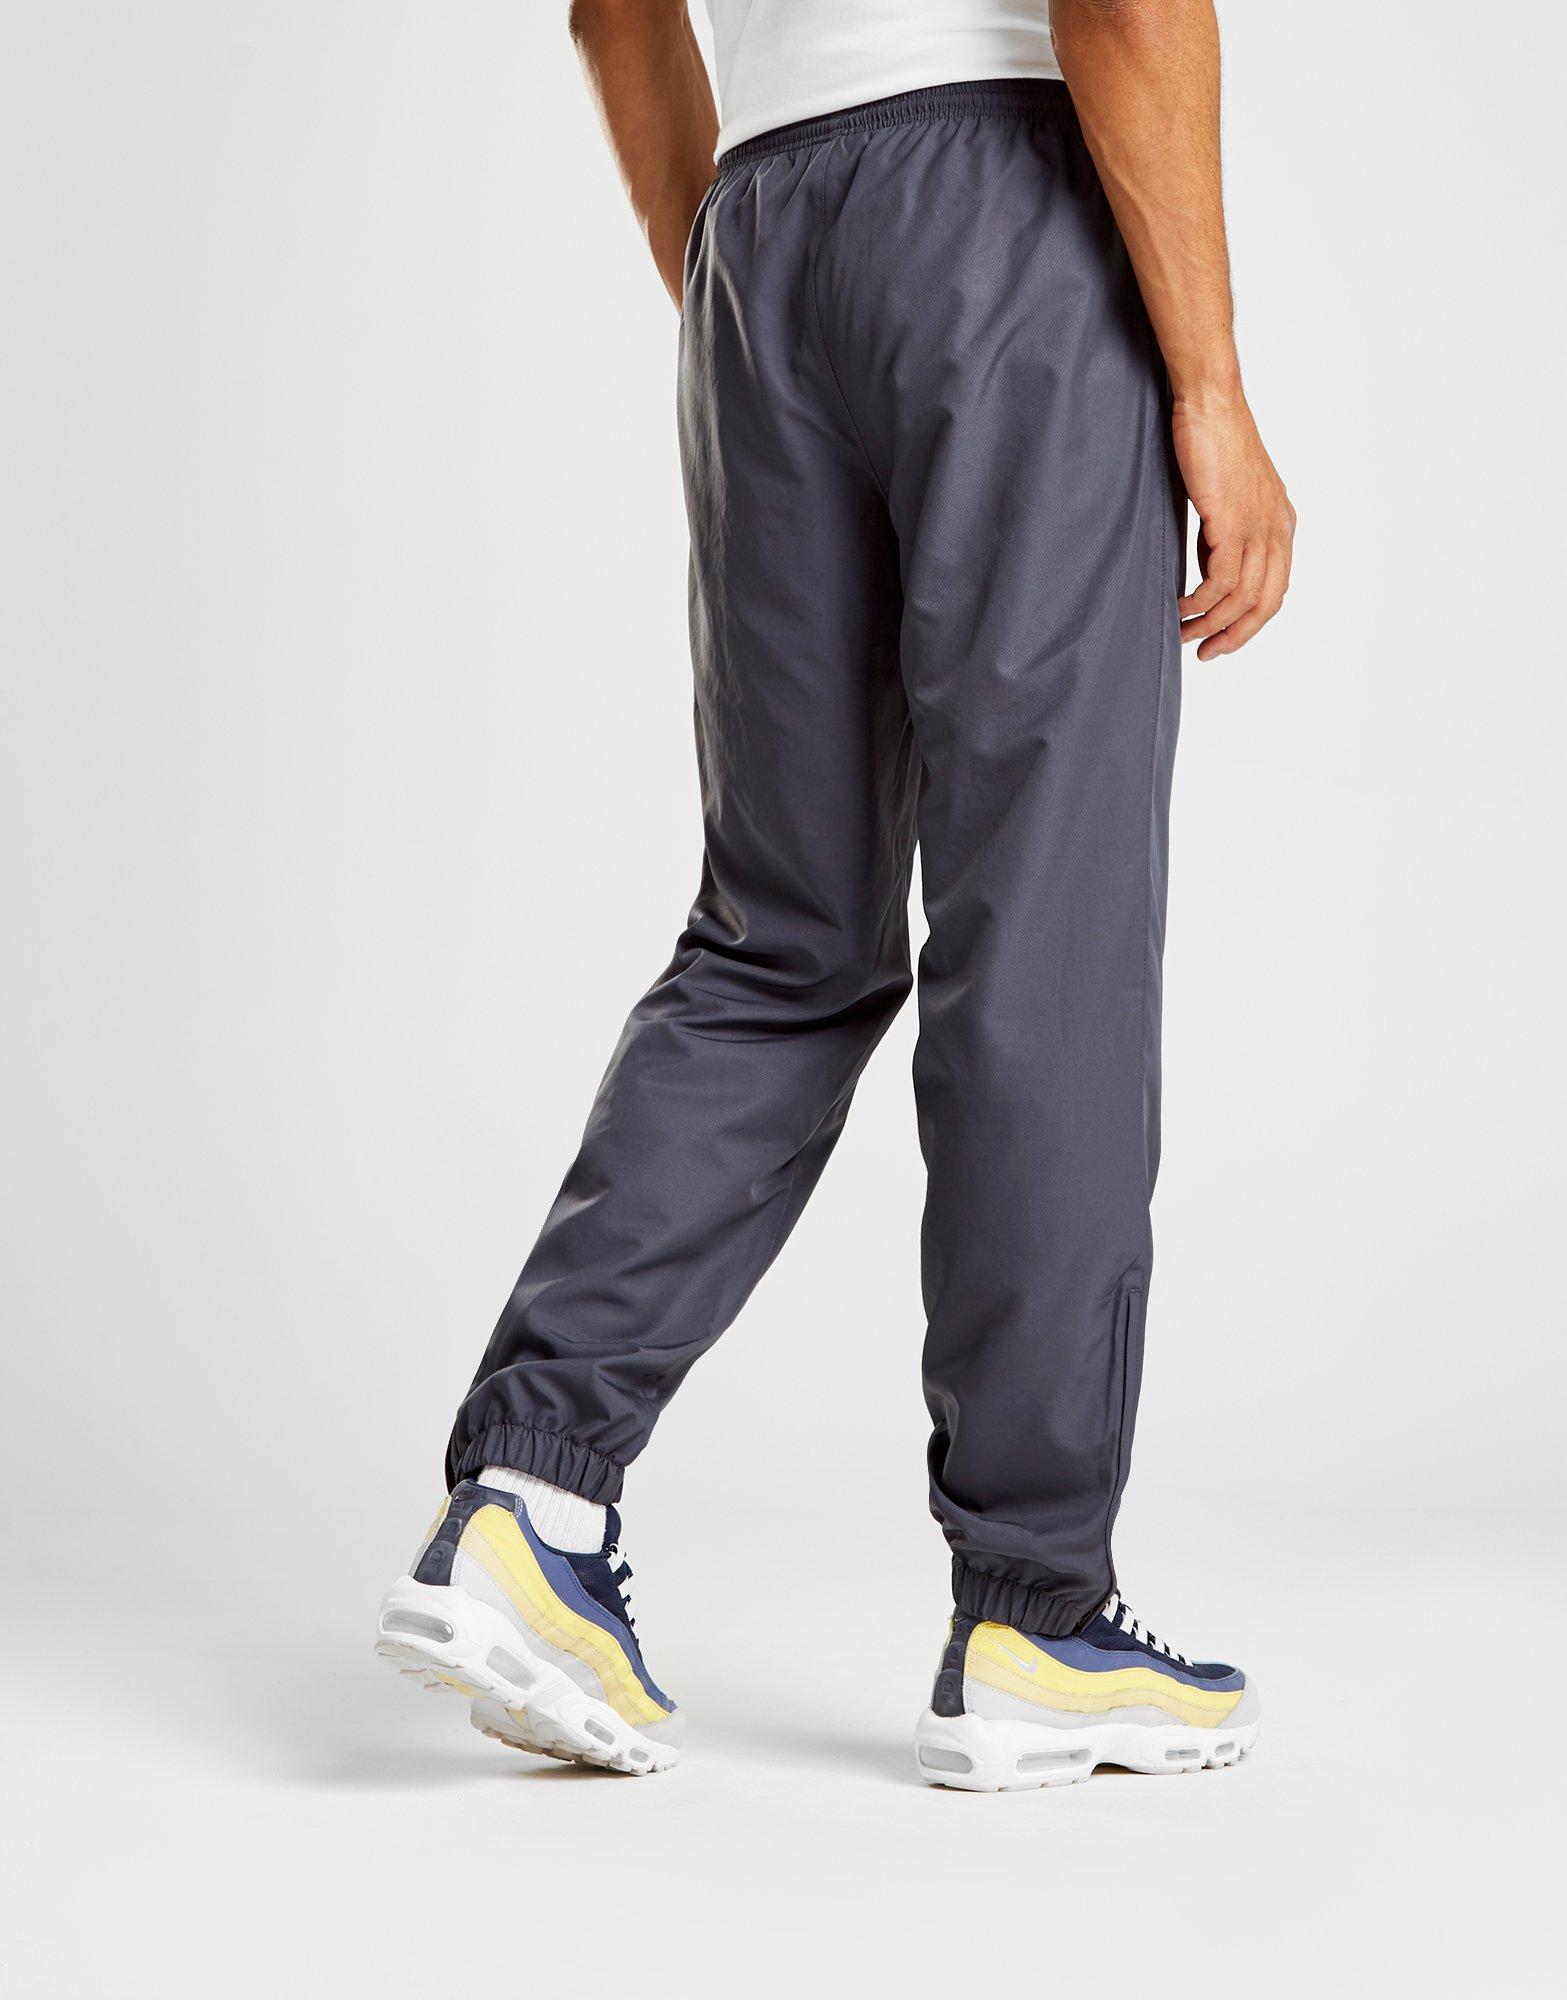 grey lacoste guppy track pants